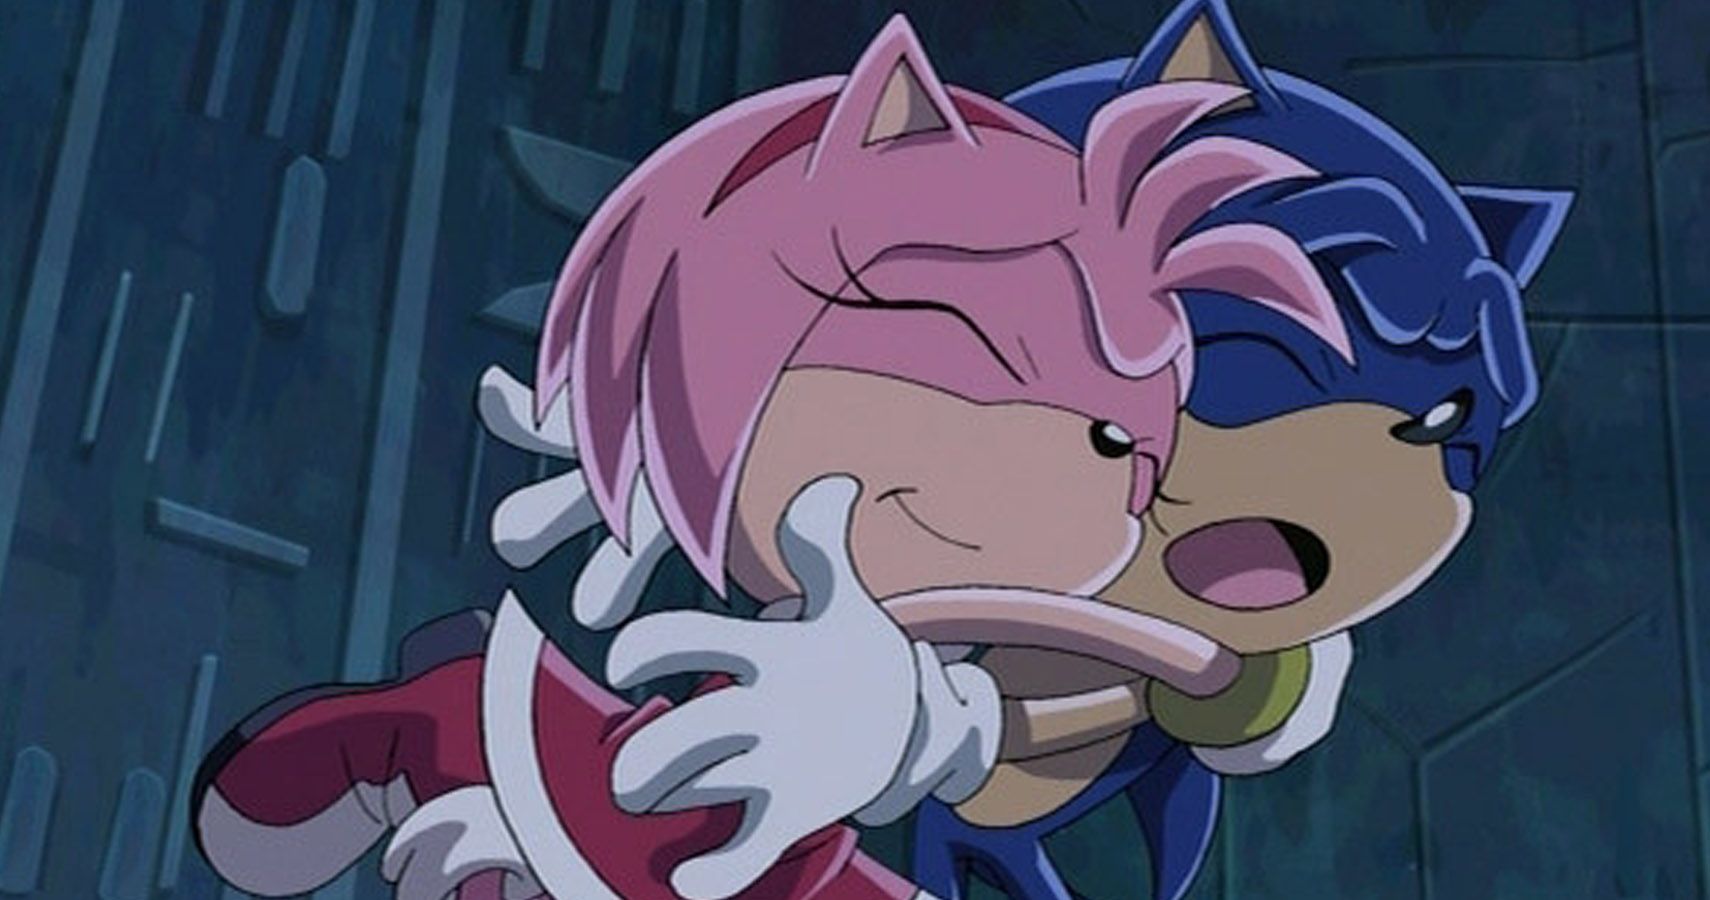 EMI!! — Don't mess with Sonic